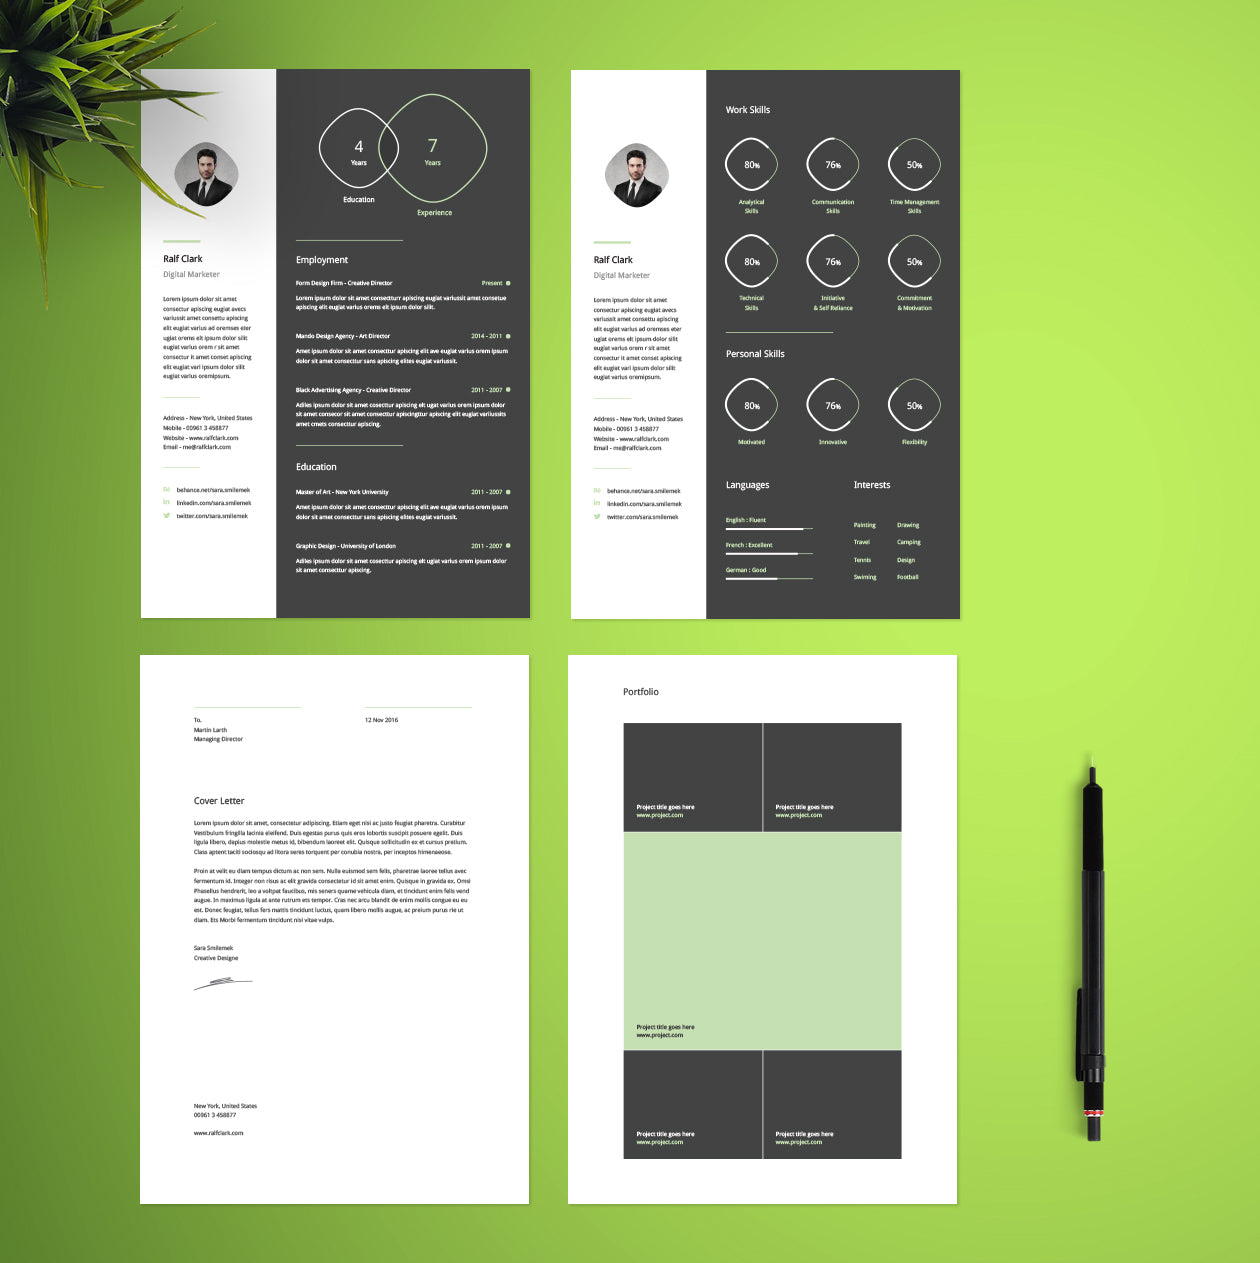 Free Infographic Resume and CV Template in Illustrator (AI) Format